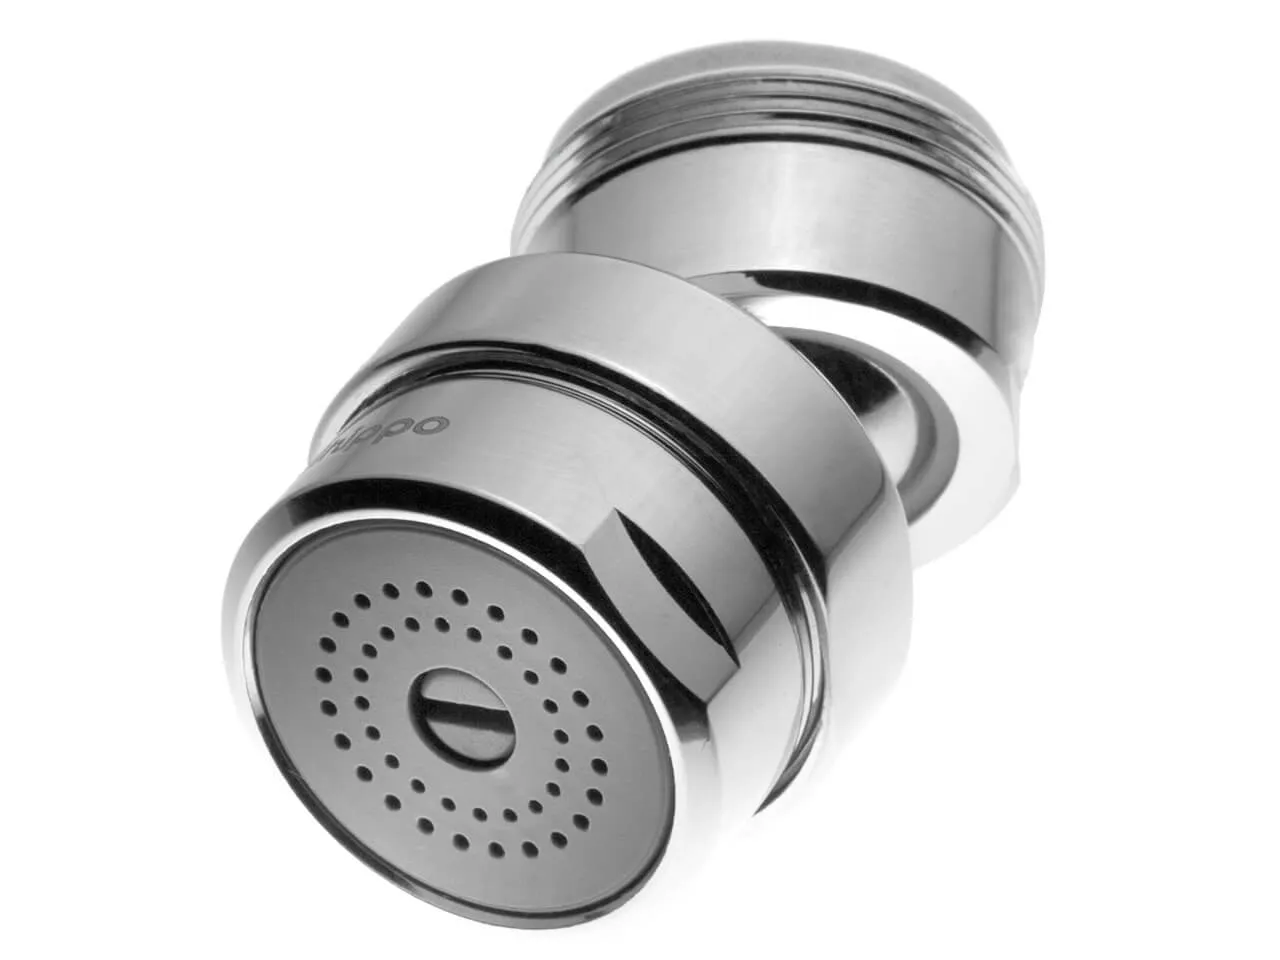 Swivel joint for kitchen tap Hihippo